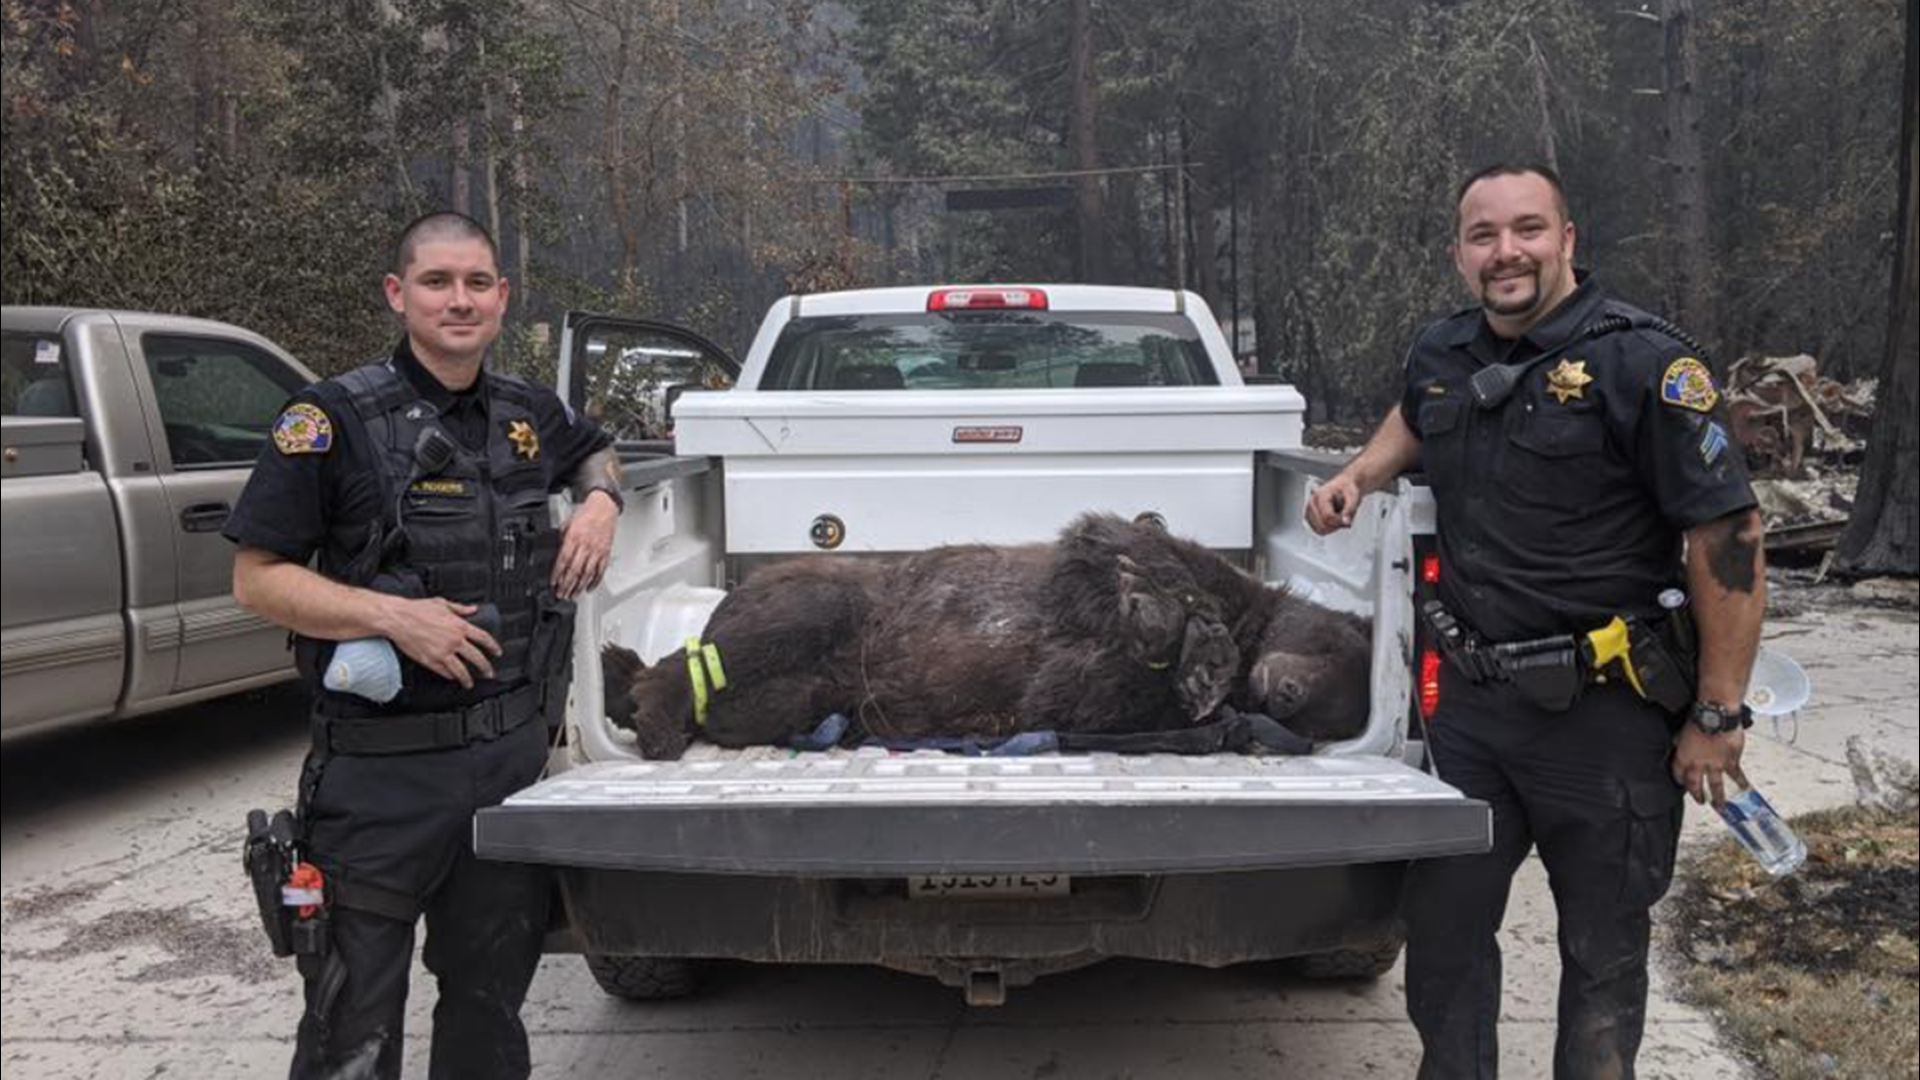 Rescue crews managed to reach the 350-pound carnivore and lugged the sleepy creature 100 yards through the forest to the warden’s vehicle.